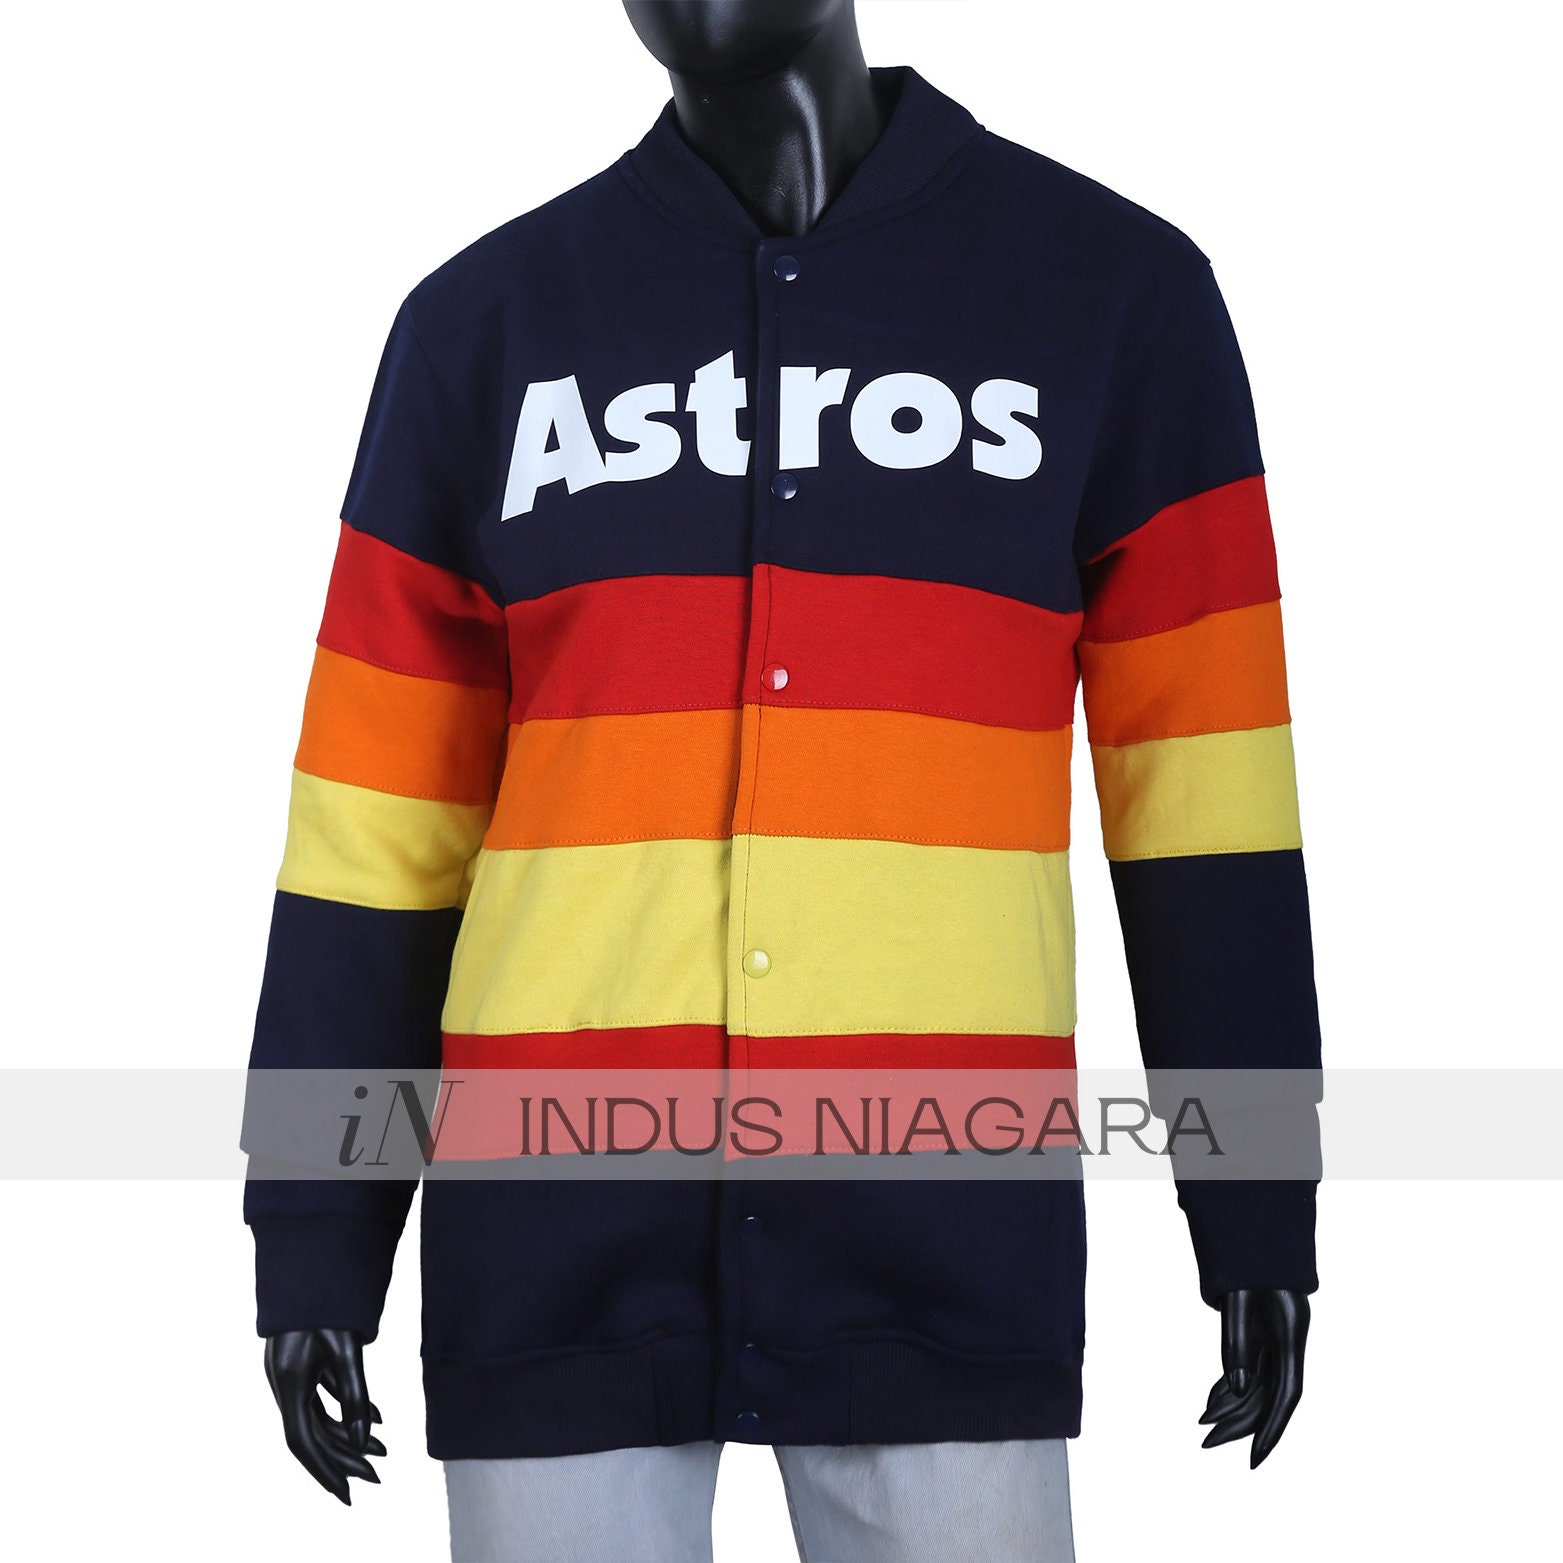 Kate Upton's Astros jacket has sold out, but here are some amazing  substitutes in the spirit of the model's now-iconic look